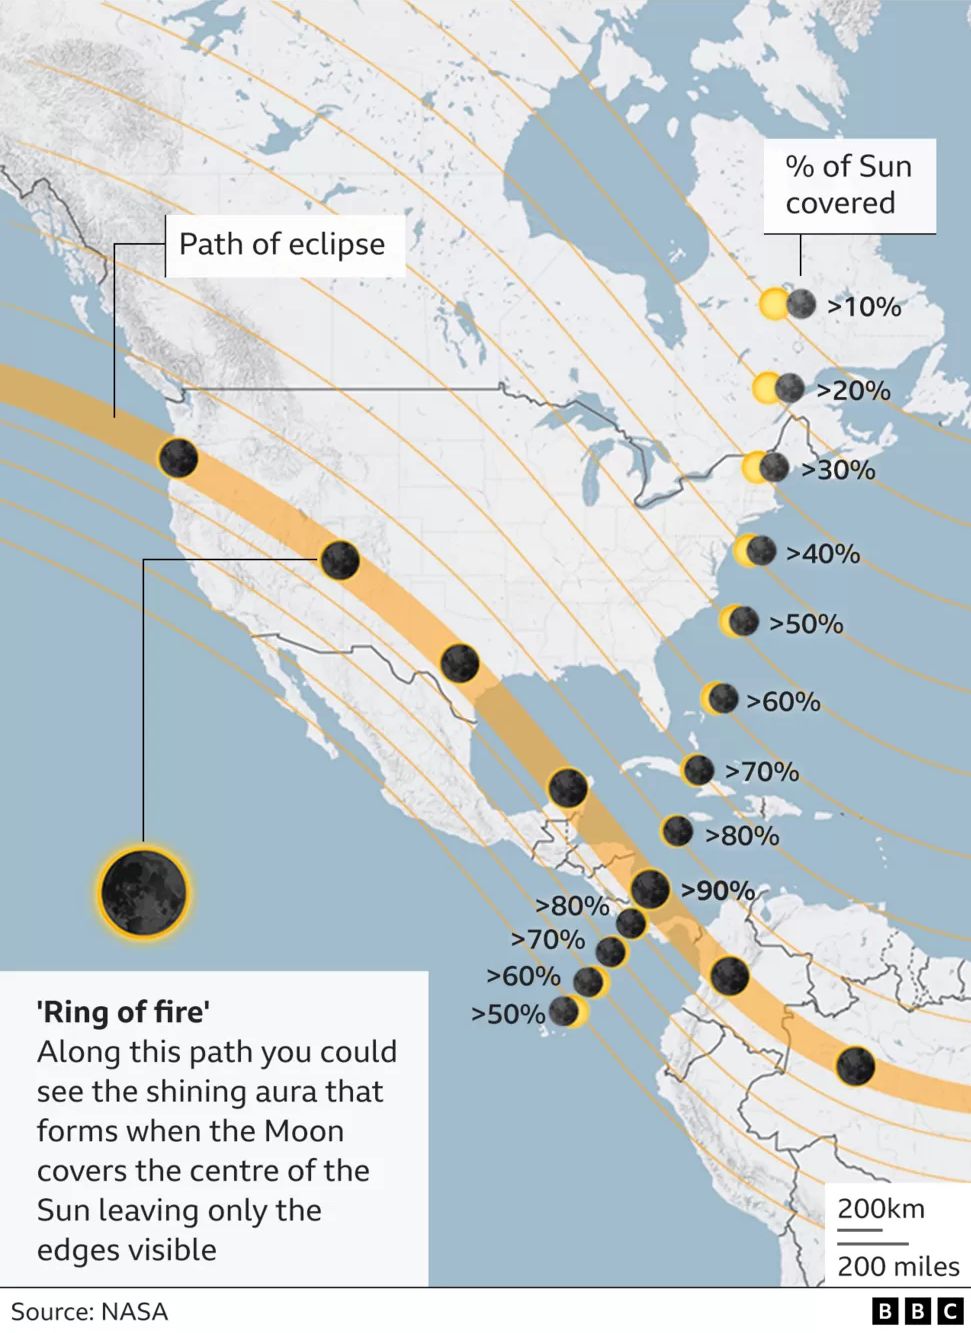 The path of the eclipse